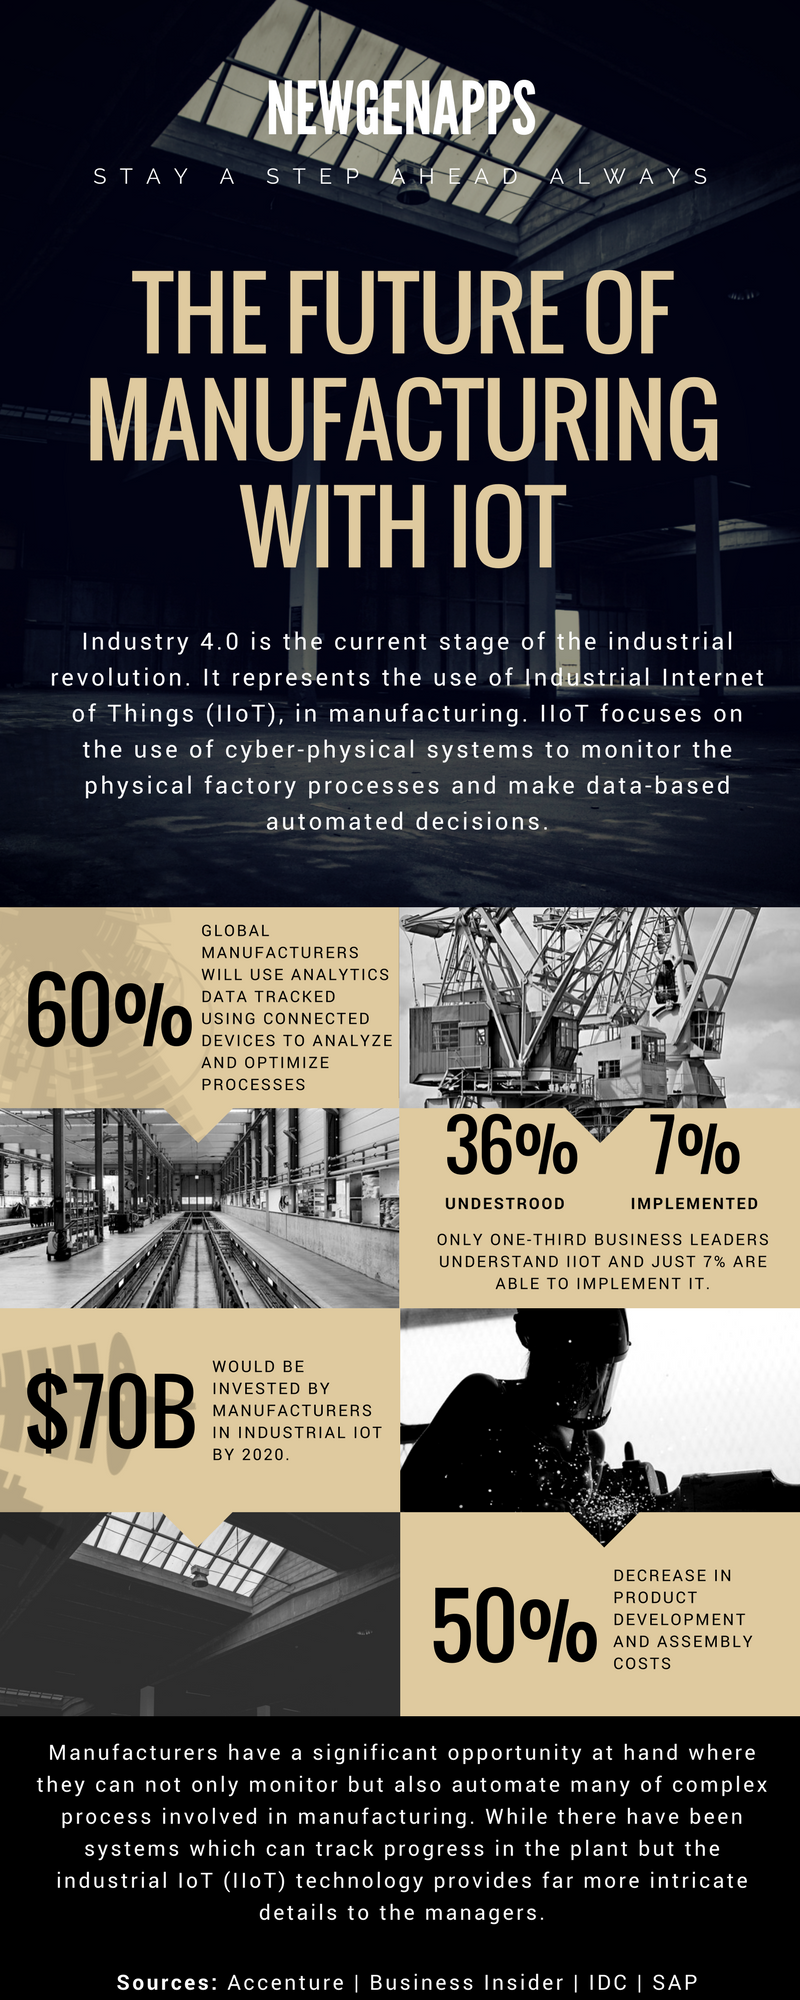 IIoT Manufacting Industry 40 Infographic Stats and Future